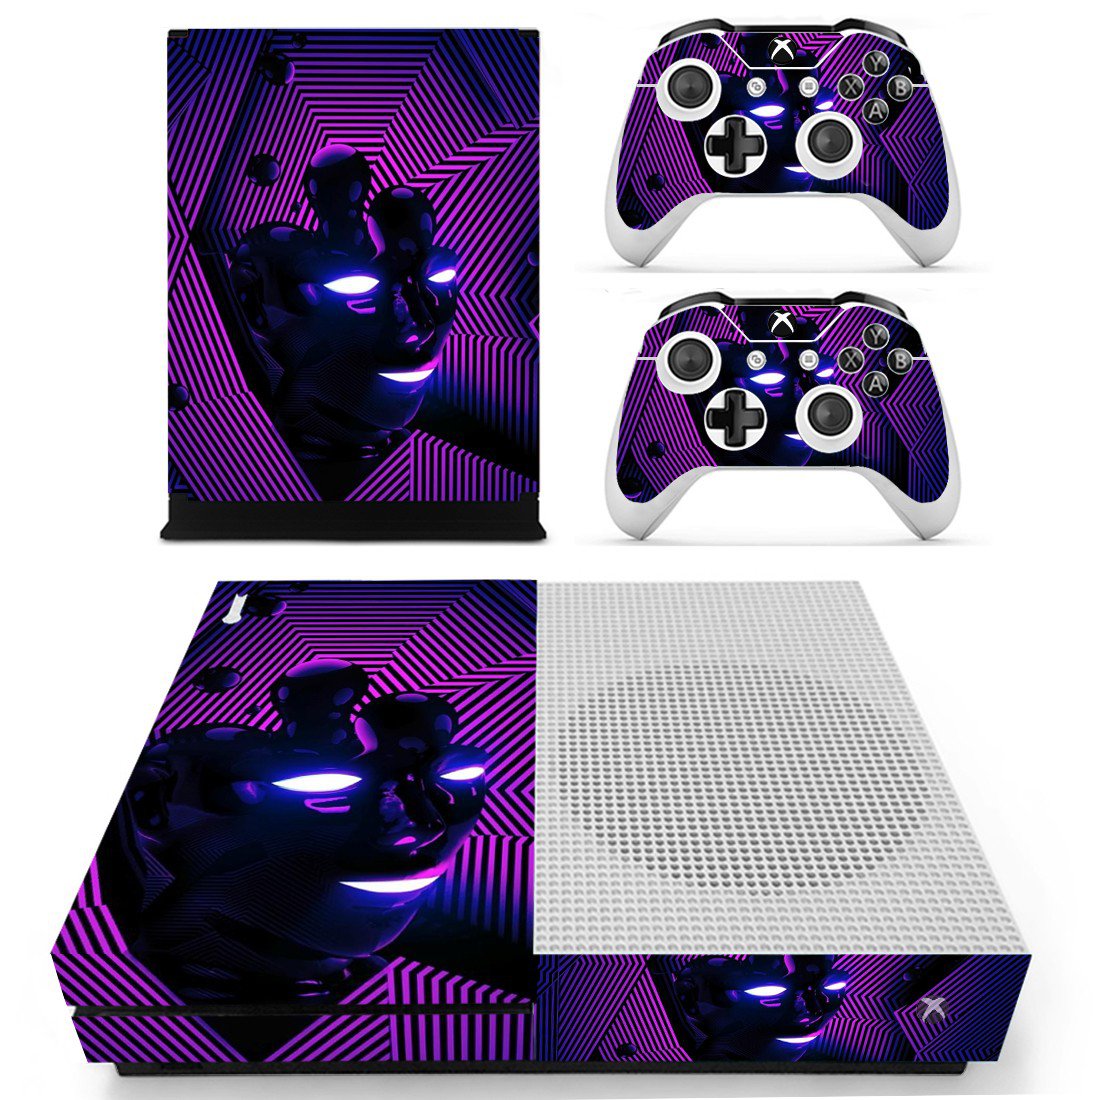 Xbox One S And Controllers Skin Sticker - Abstraction Design 5